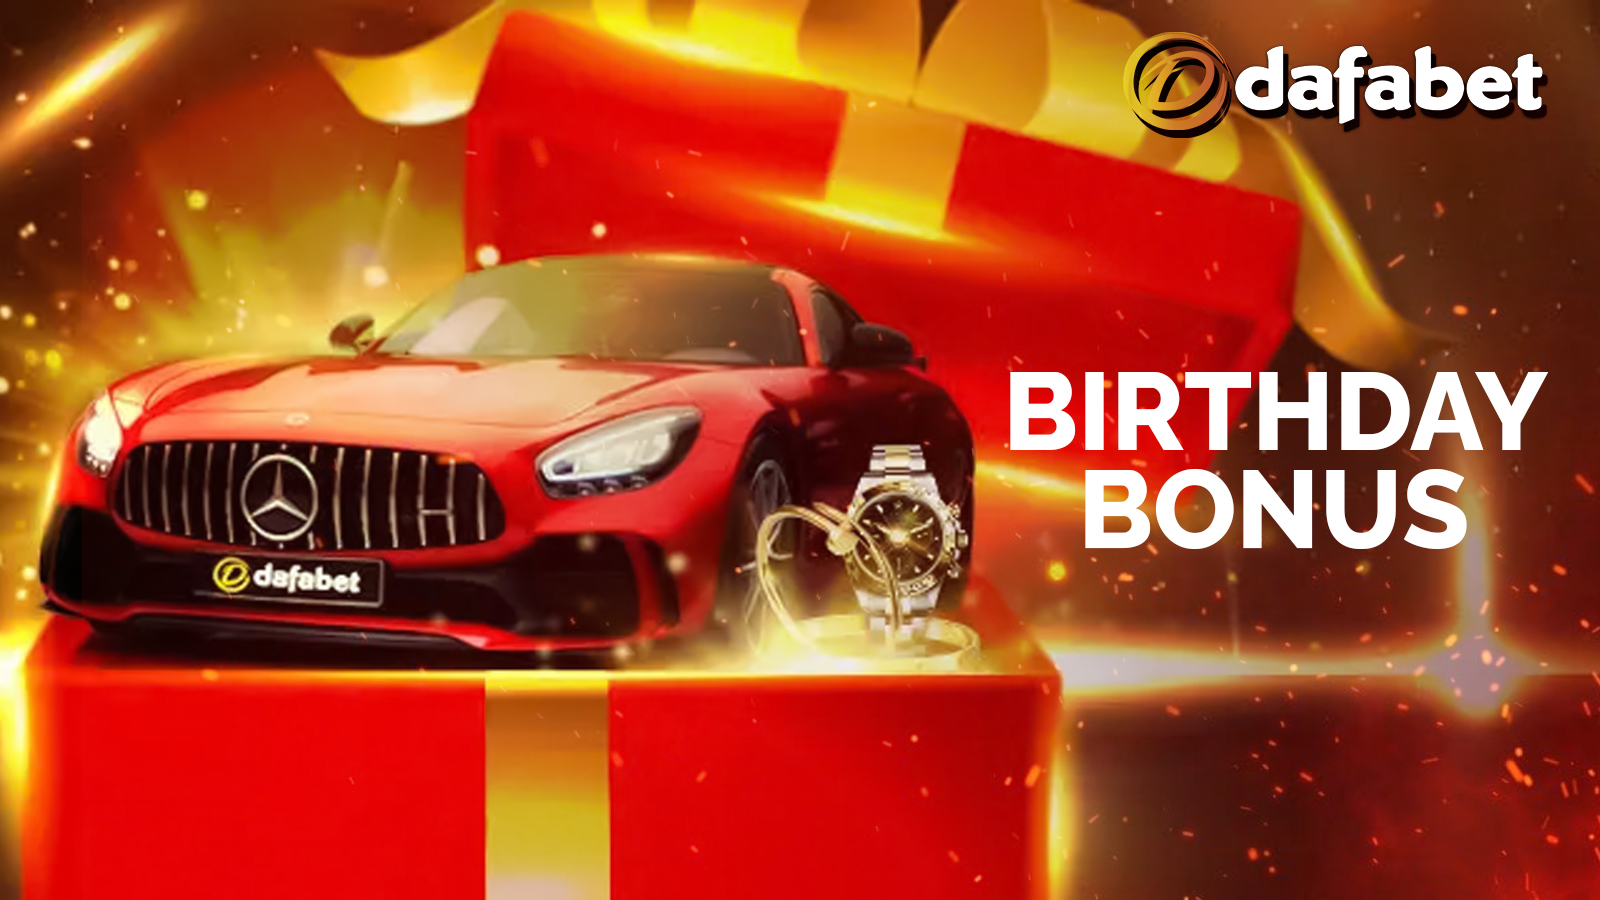 Dafabet gives a special bonus for those, who have a birthday.